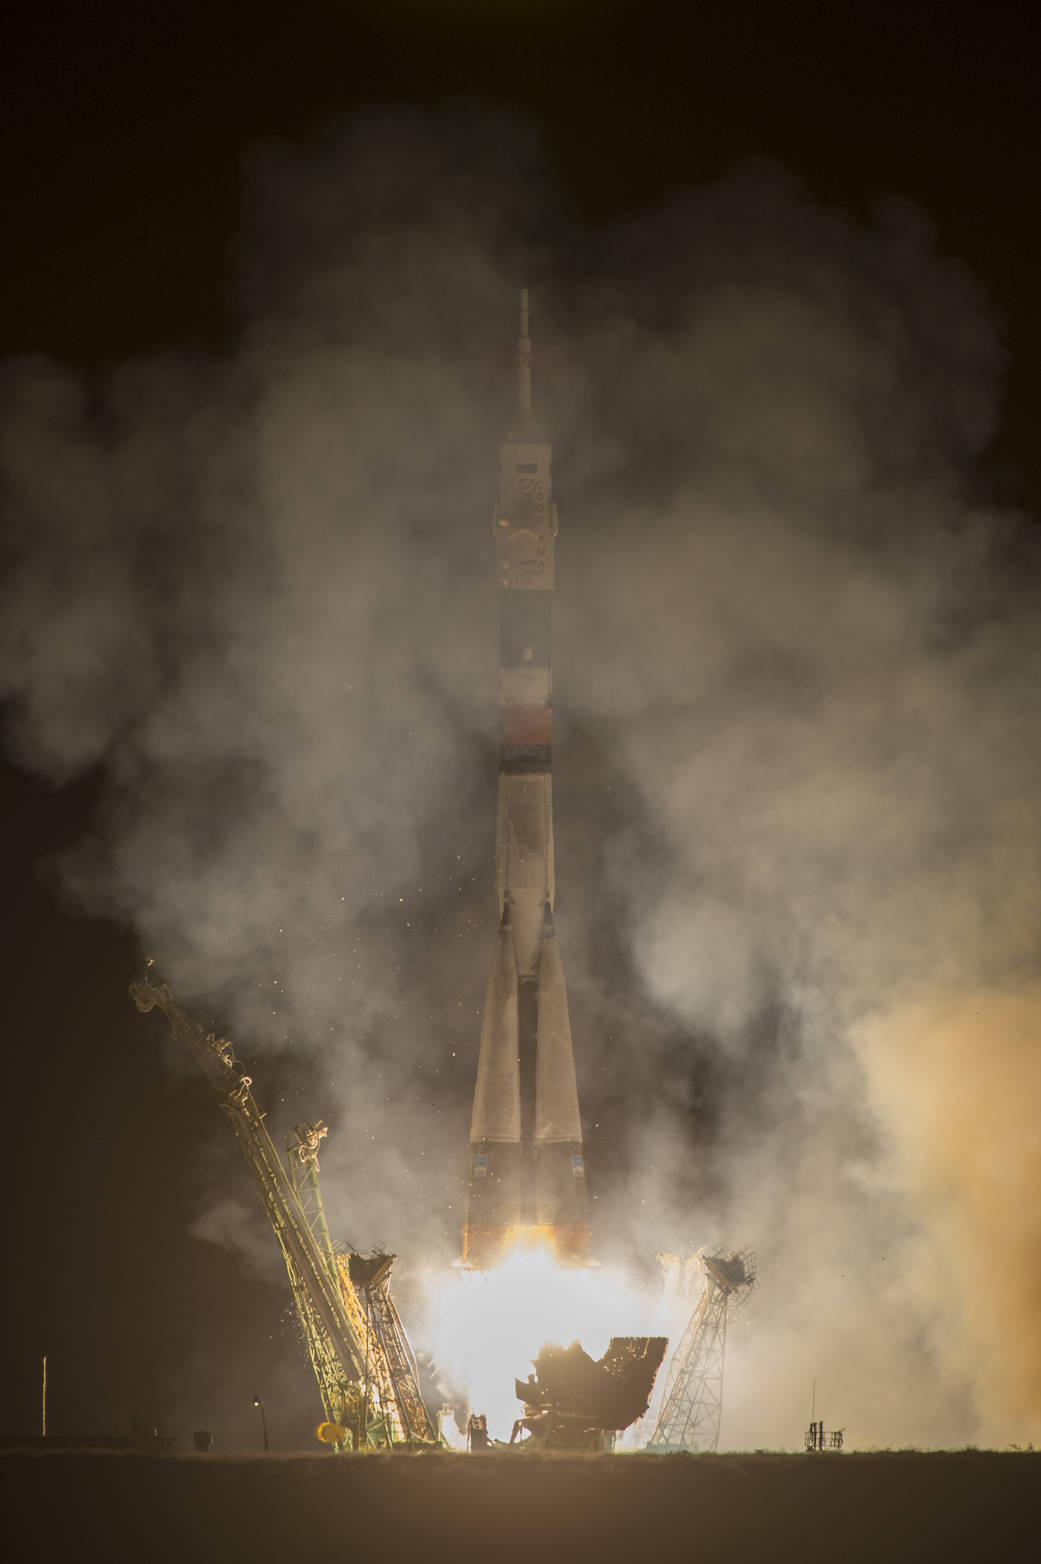 The Soyuz TMA-10M rocket launches from the Baikonur Cosmodrome in Kazakhstan on Thurs., Sept. 26, 2013 (Kazakh time) carrying Ex